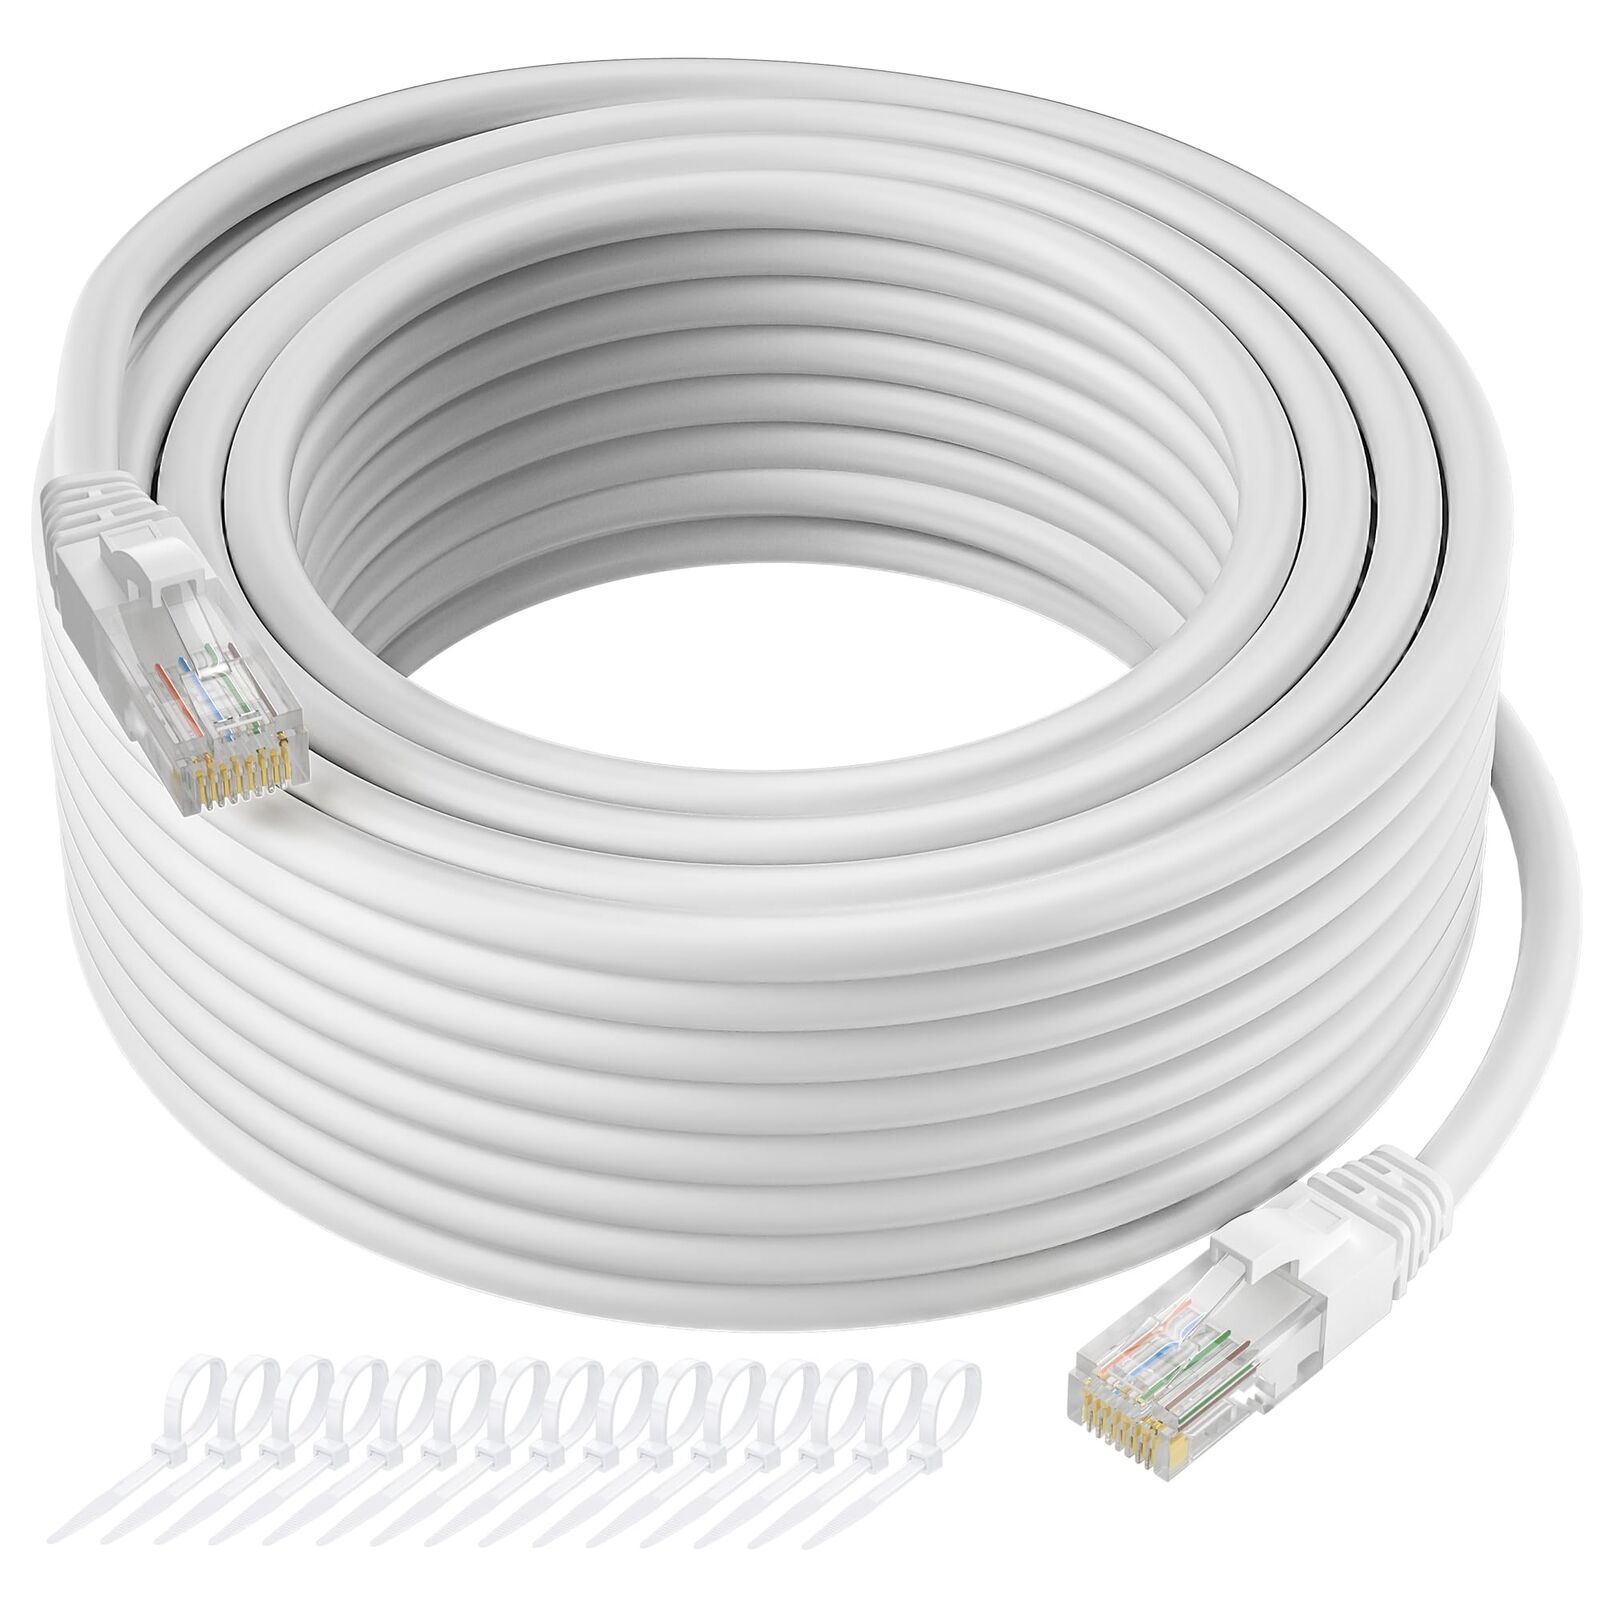 Cat5e Ethernet Cable 50 FT Long Cat 5e Internet Cable White Snagless Patch Co...